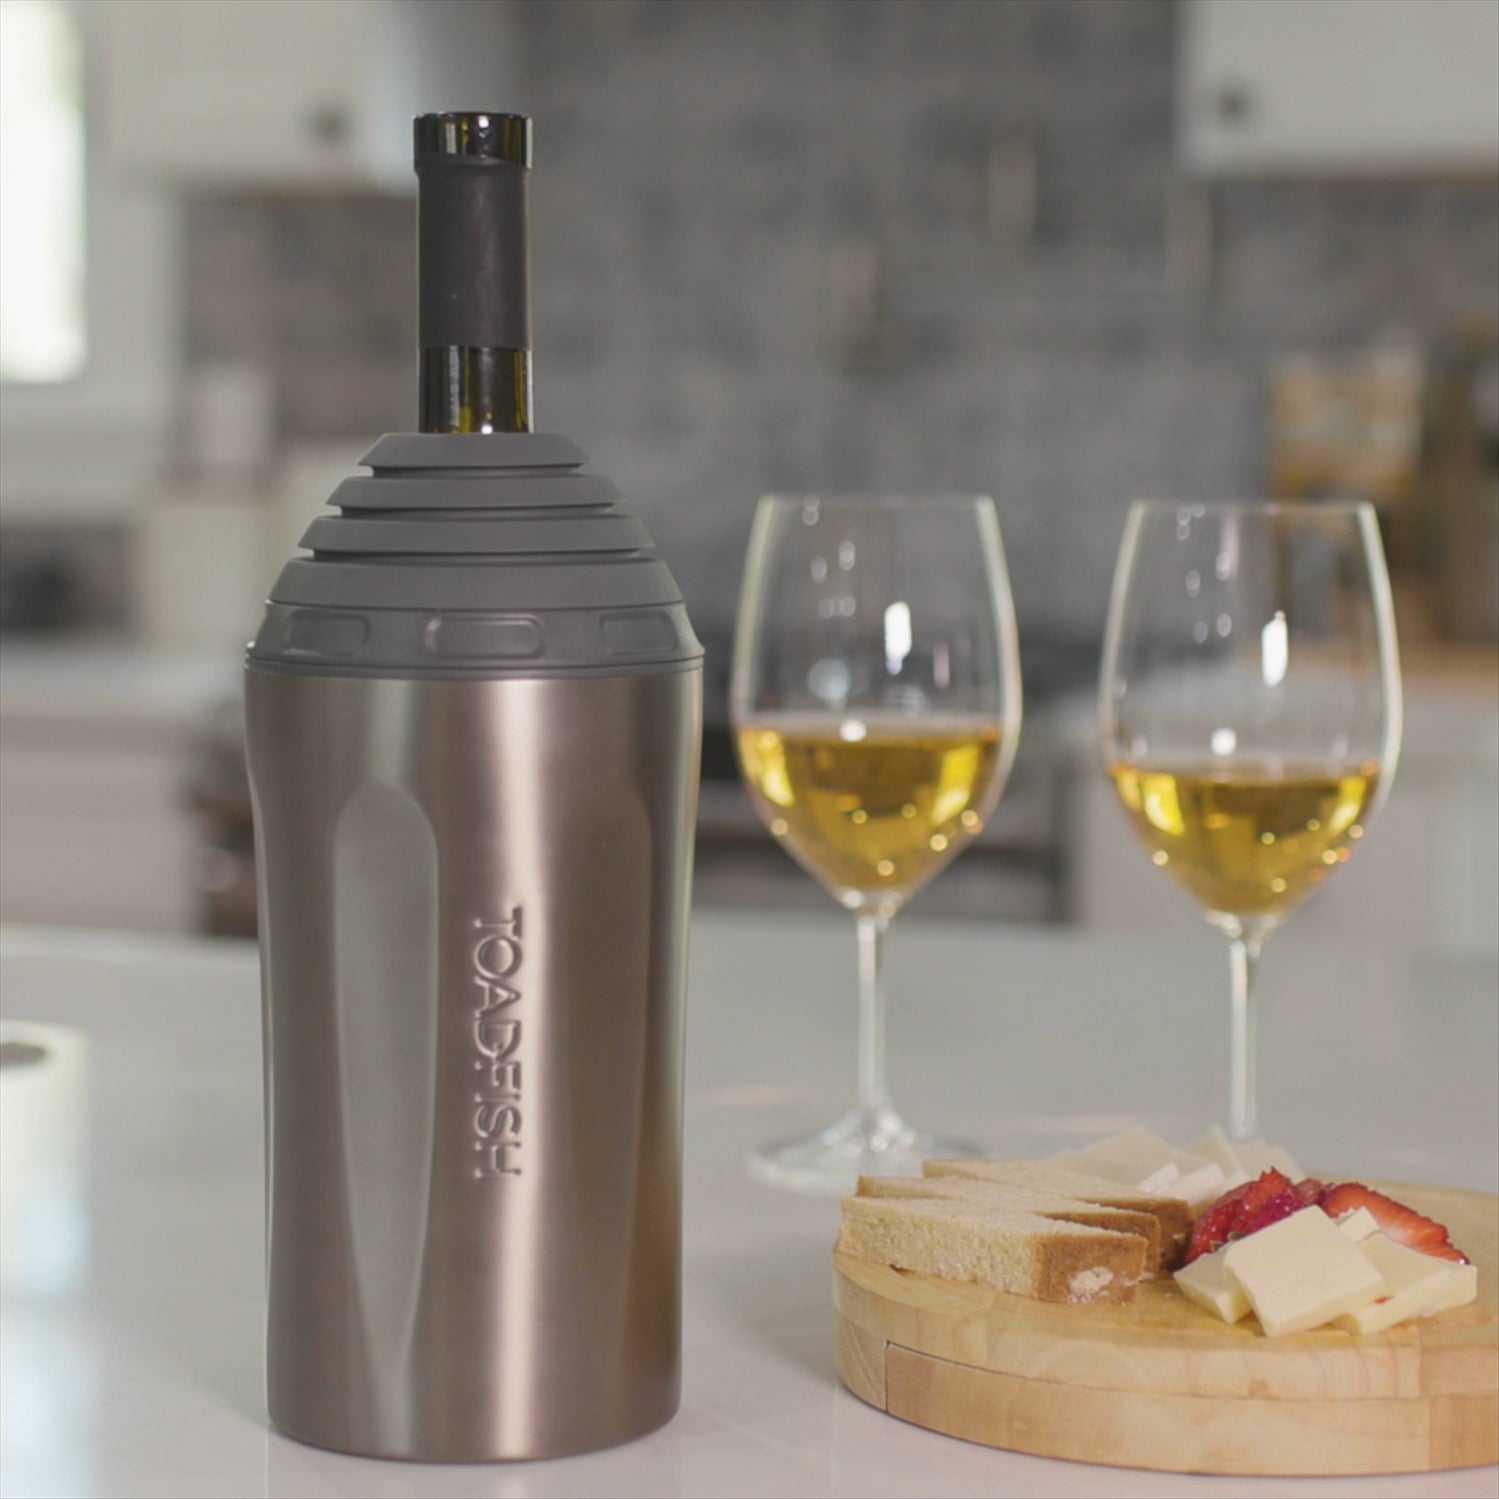 Toadfish Insulated Wine Chiller With Flexi-lock Pouring, Fits Most Bottles